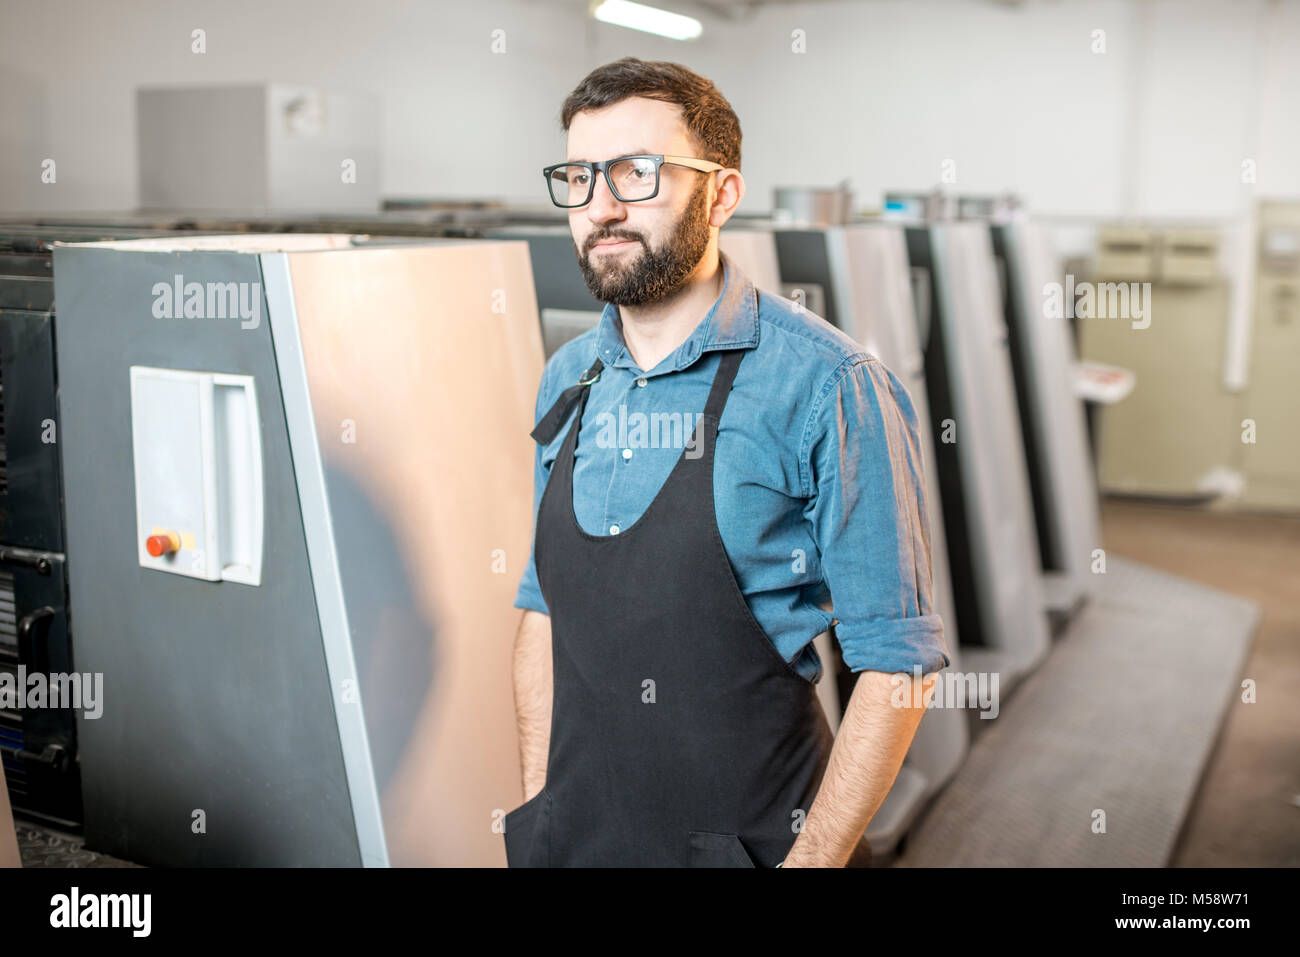 Typographer portrait at the manufacturing Stock Photo